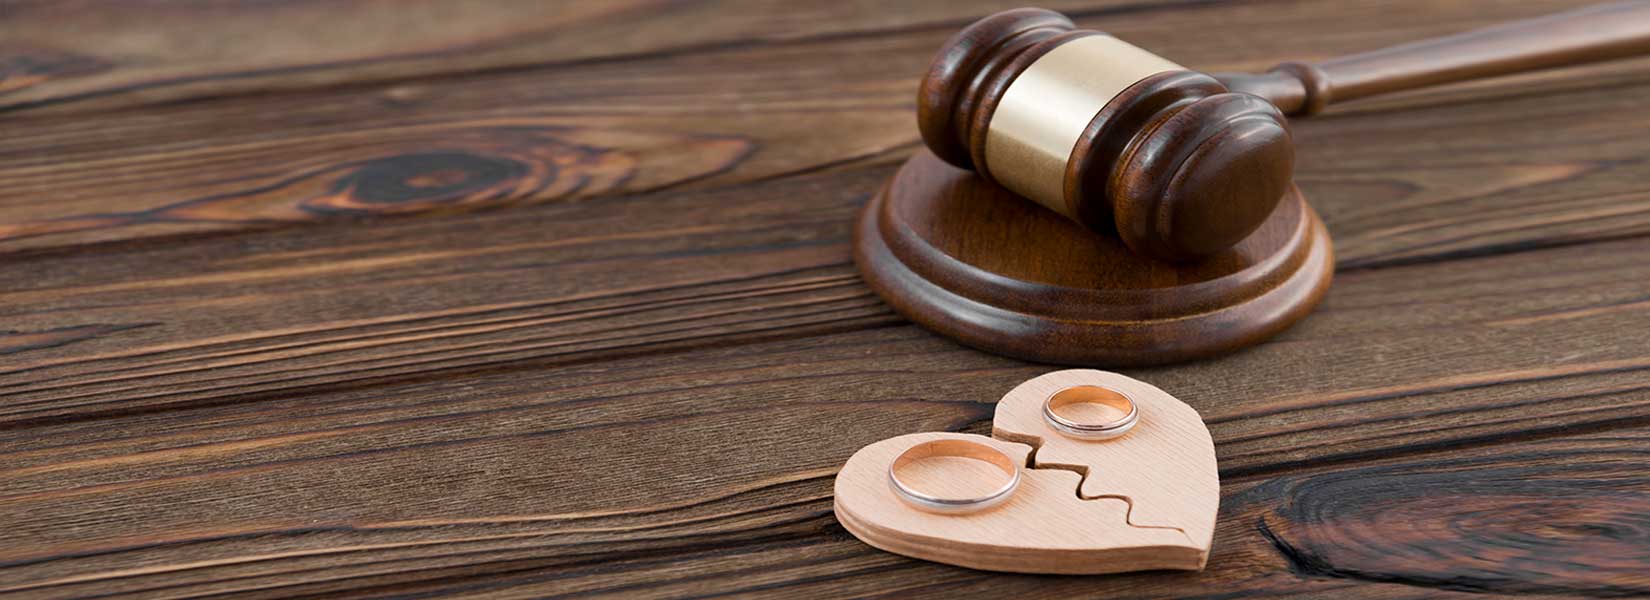 how is child custody handled in a lgbt divorce?